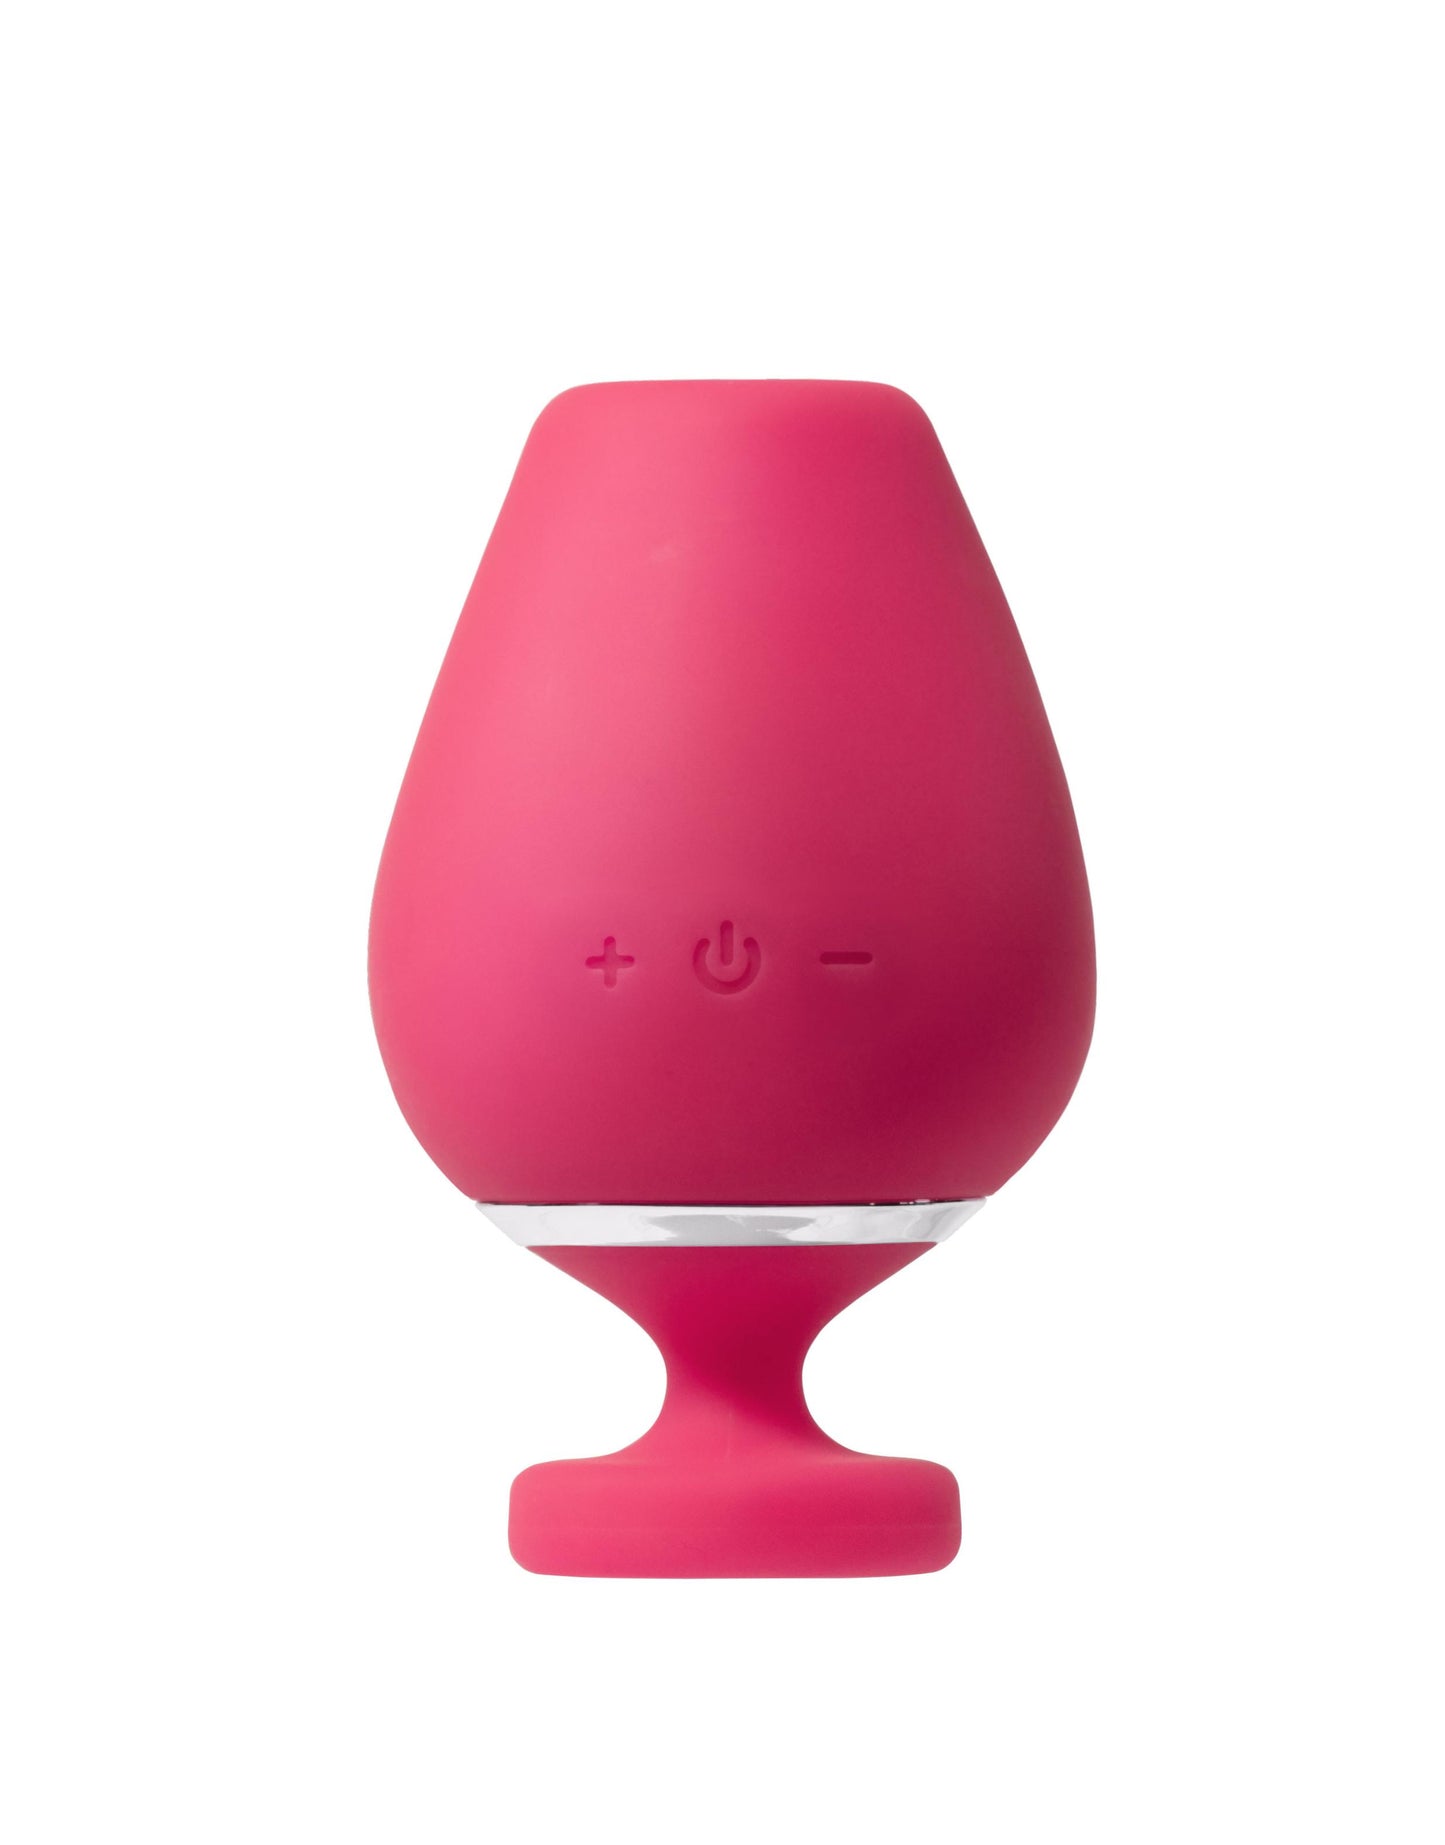 Vino Rechargeable Vibrating Sonic Vibe - Pink